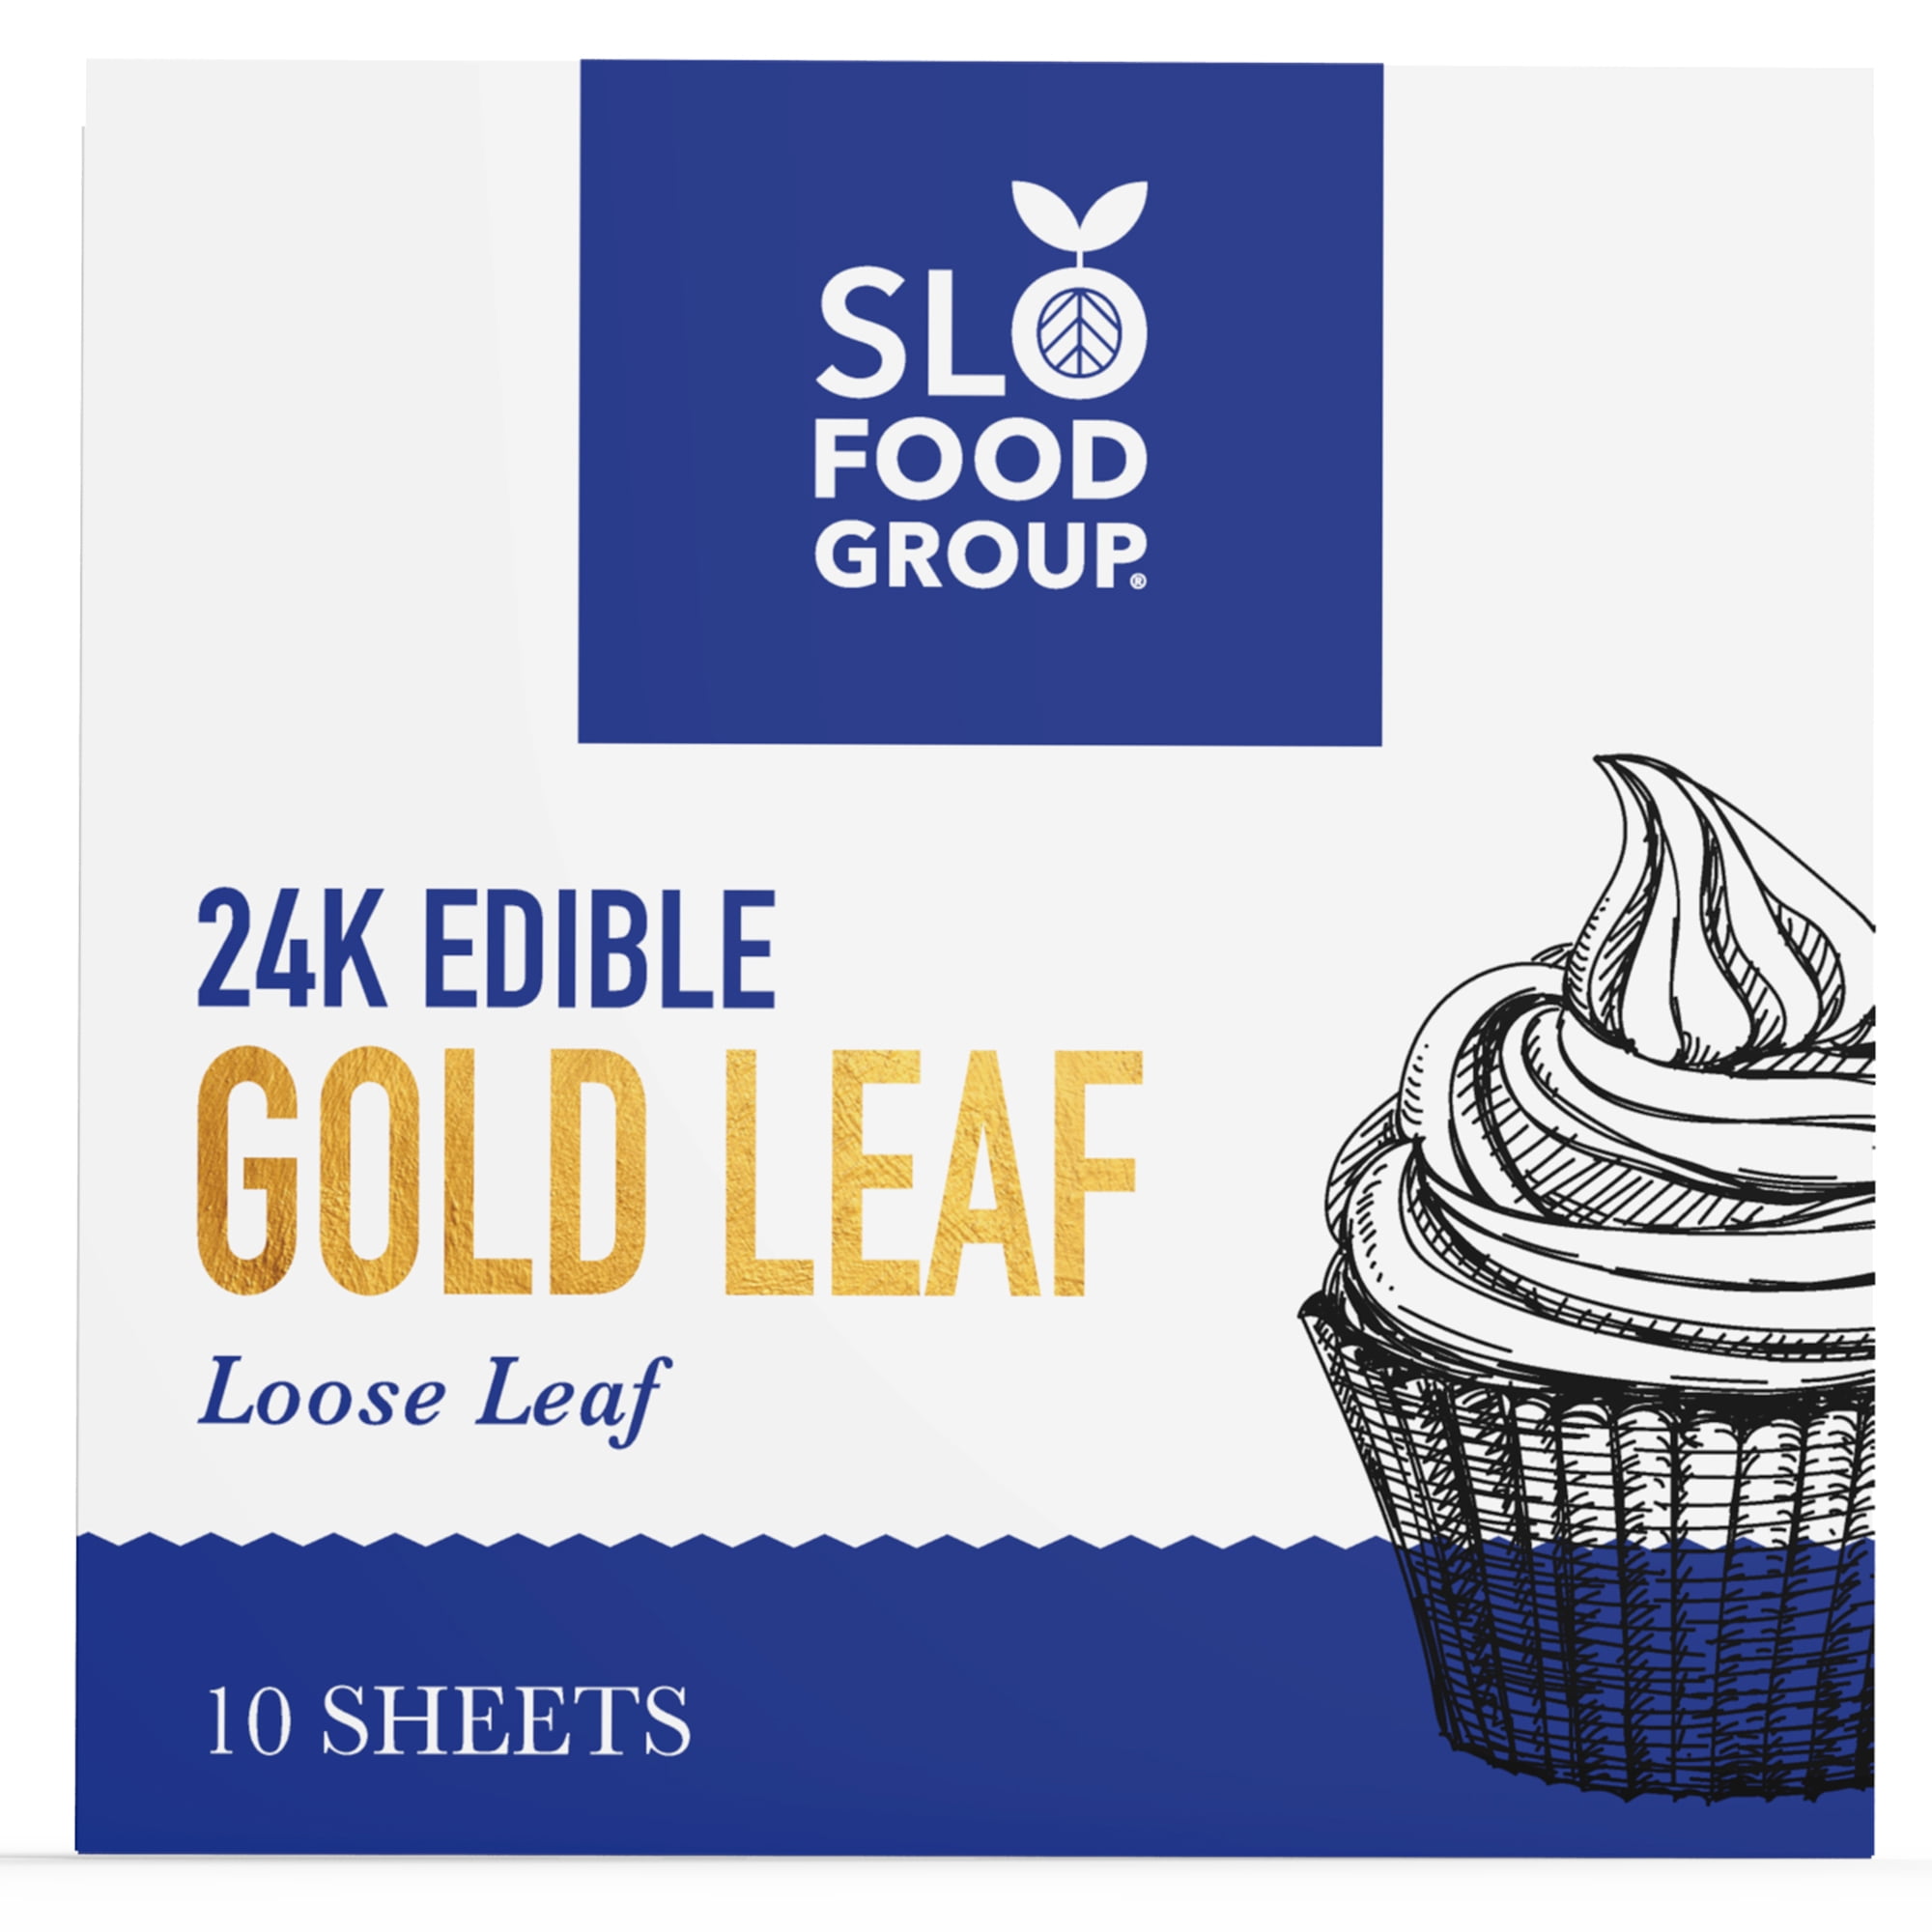 Super Small Series 24k Gold Edible Gold Leaf Sheets - 30 sheets x 0.6”, Sweets